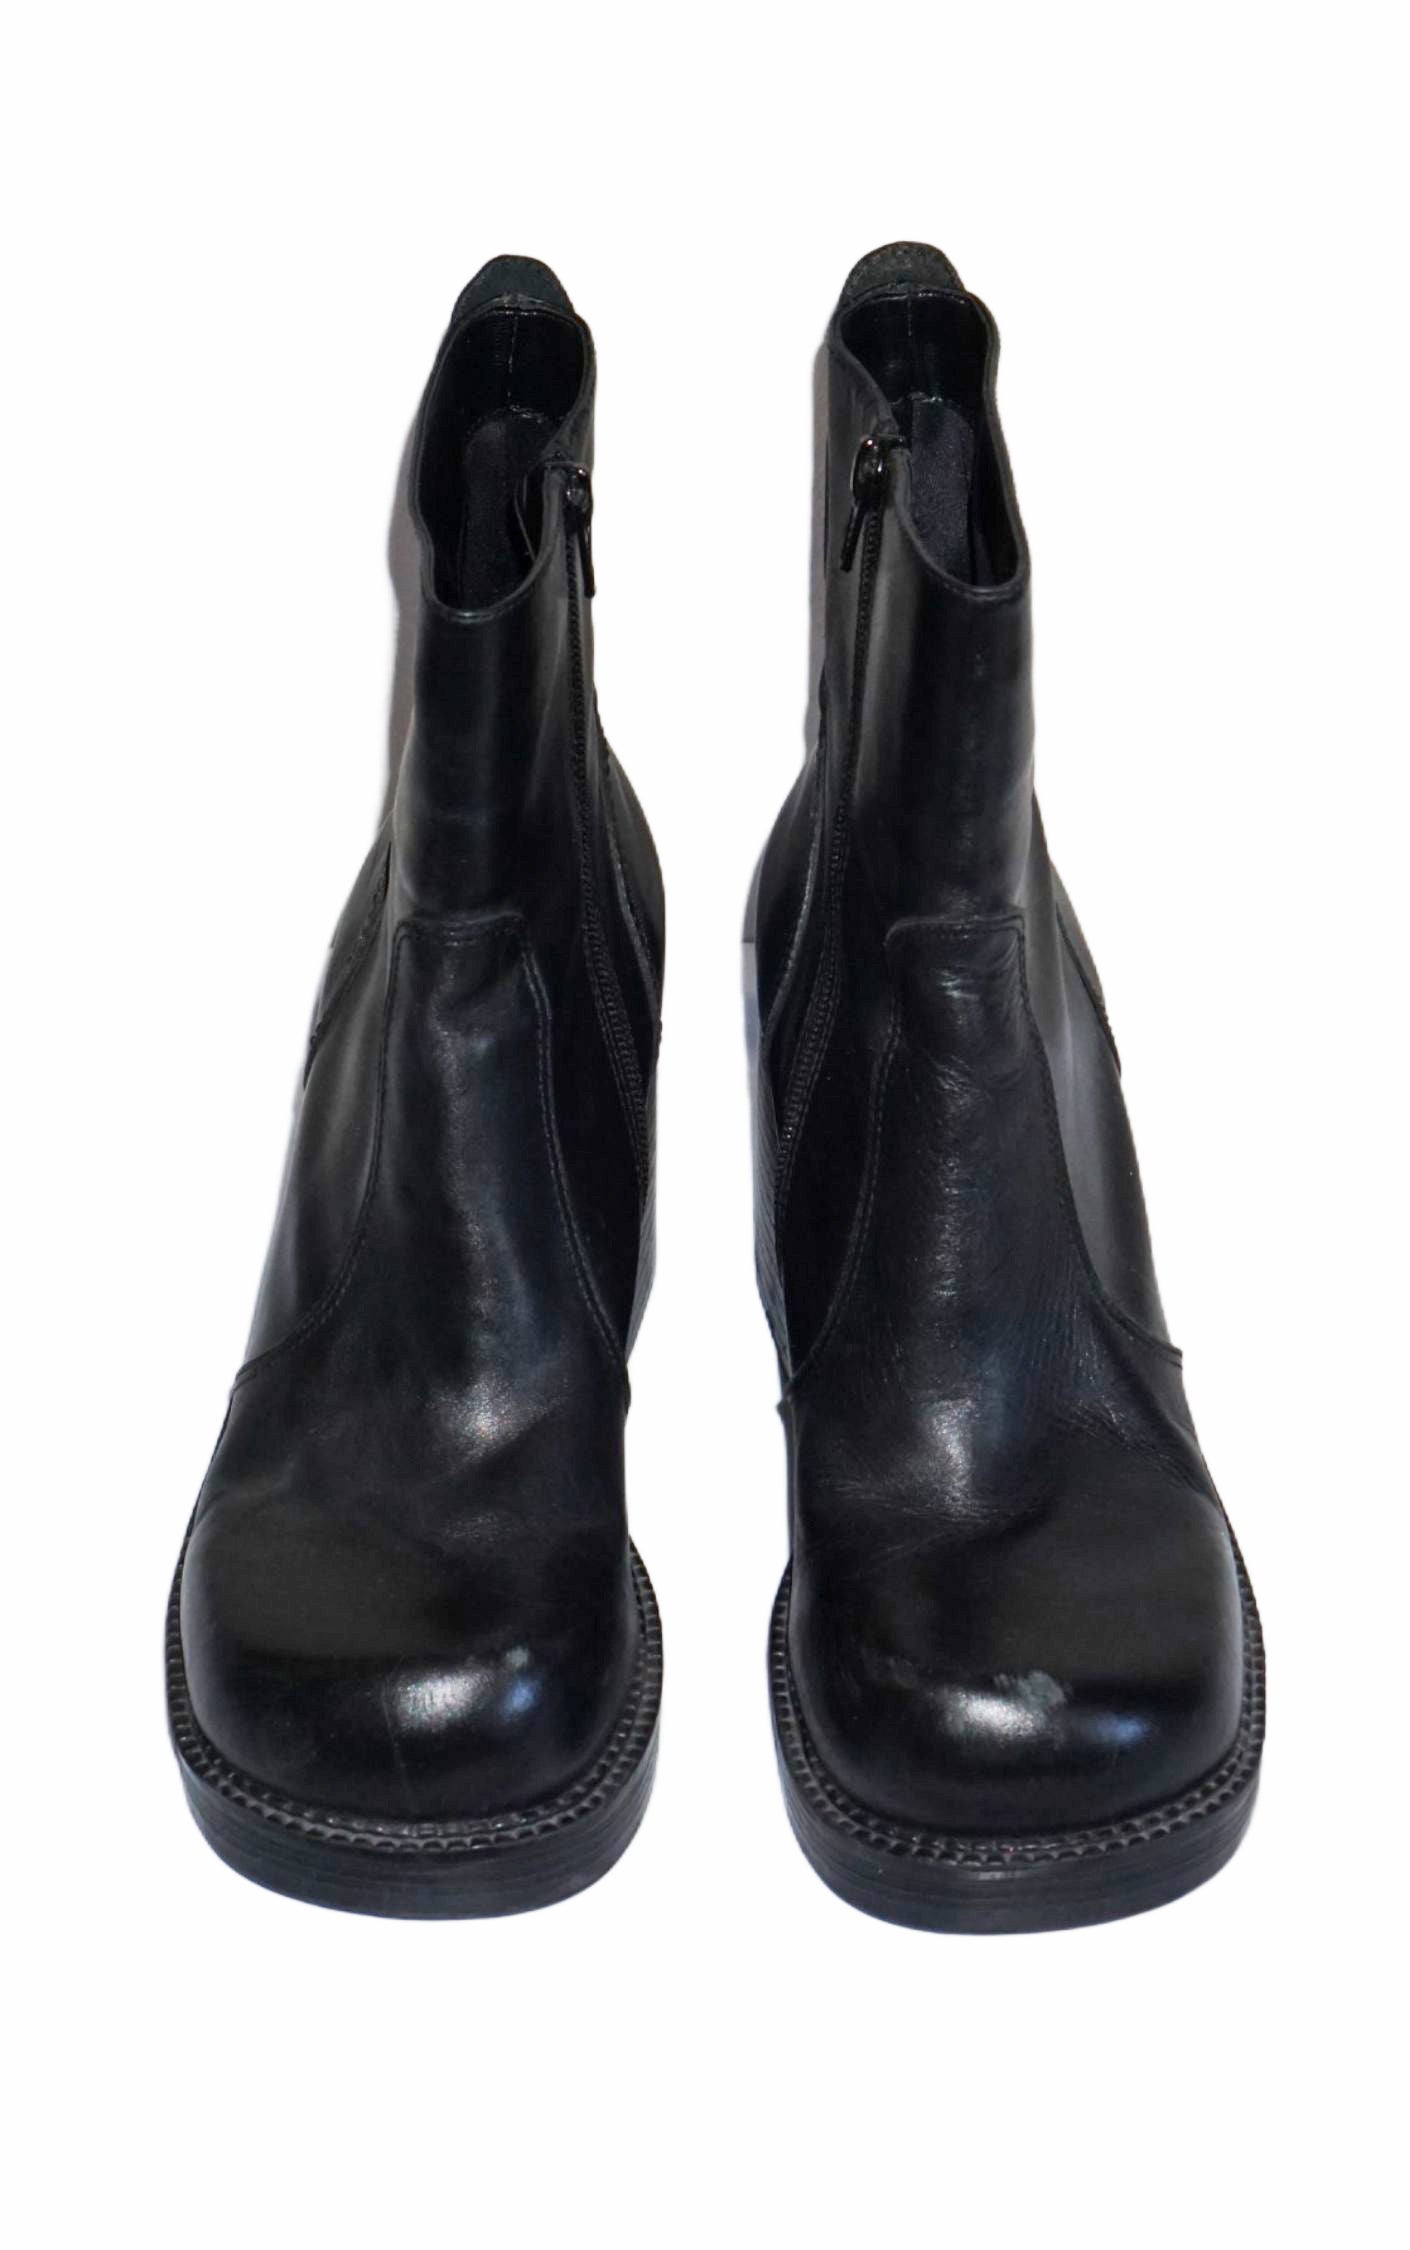 VINTAGE 90s Chunky Heels Square Toe Black Leather Ankle Boots resellum